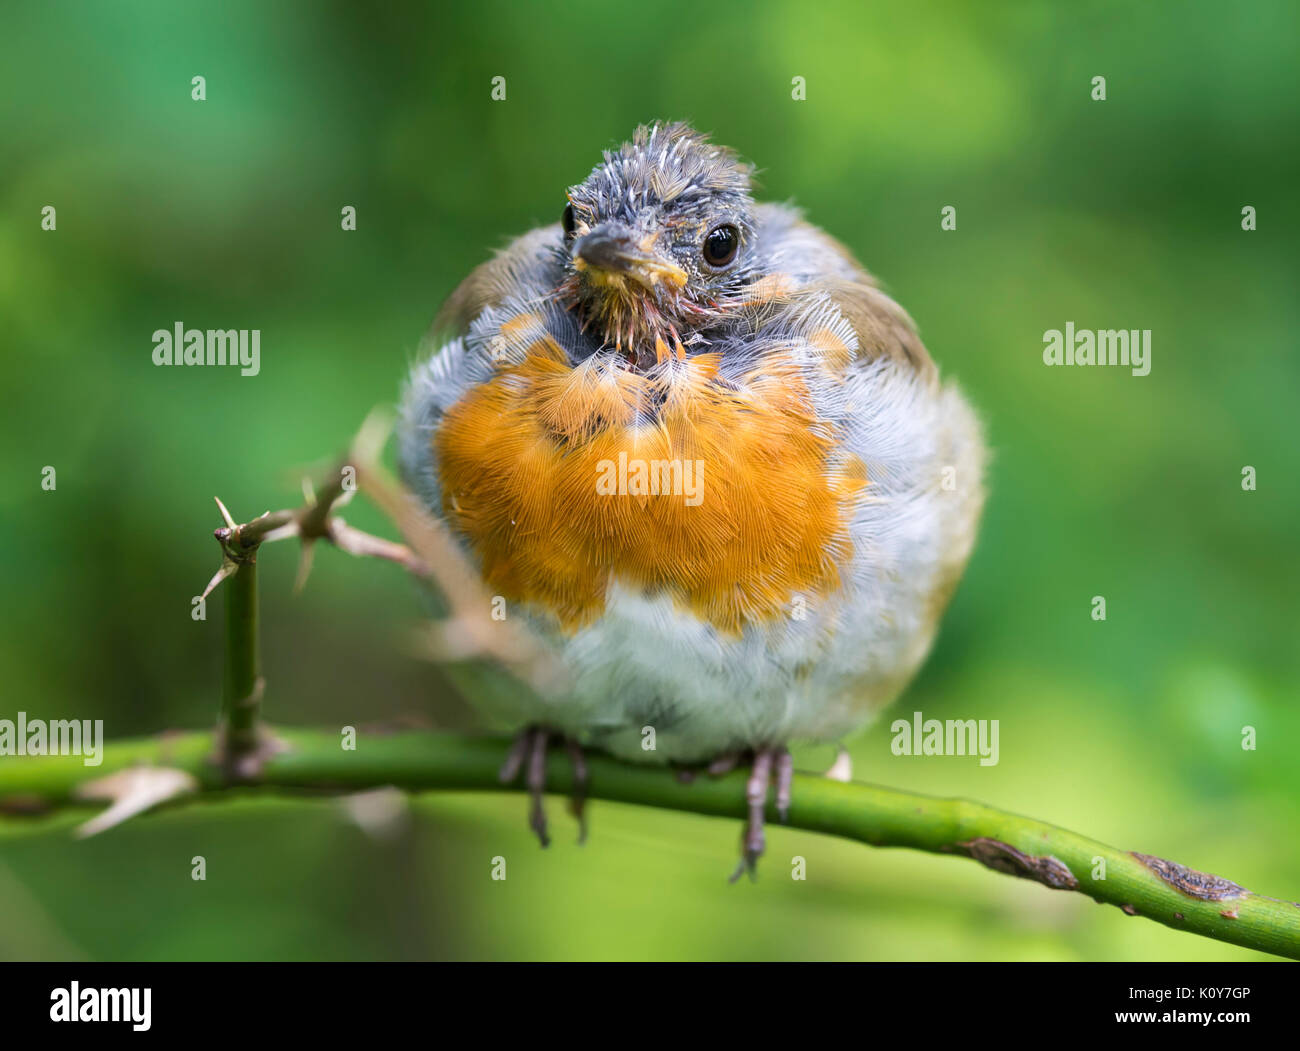 European Robin (Erithacus rubecula) in moult, perched on a twig in Summer in West Sussex, England, UK. Robin moulting showing lack of feathers. Stock Photo